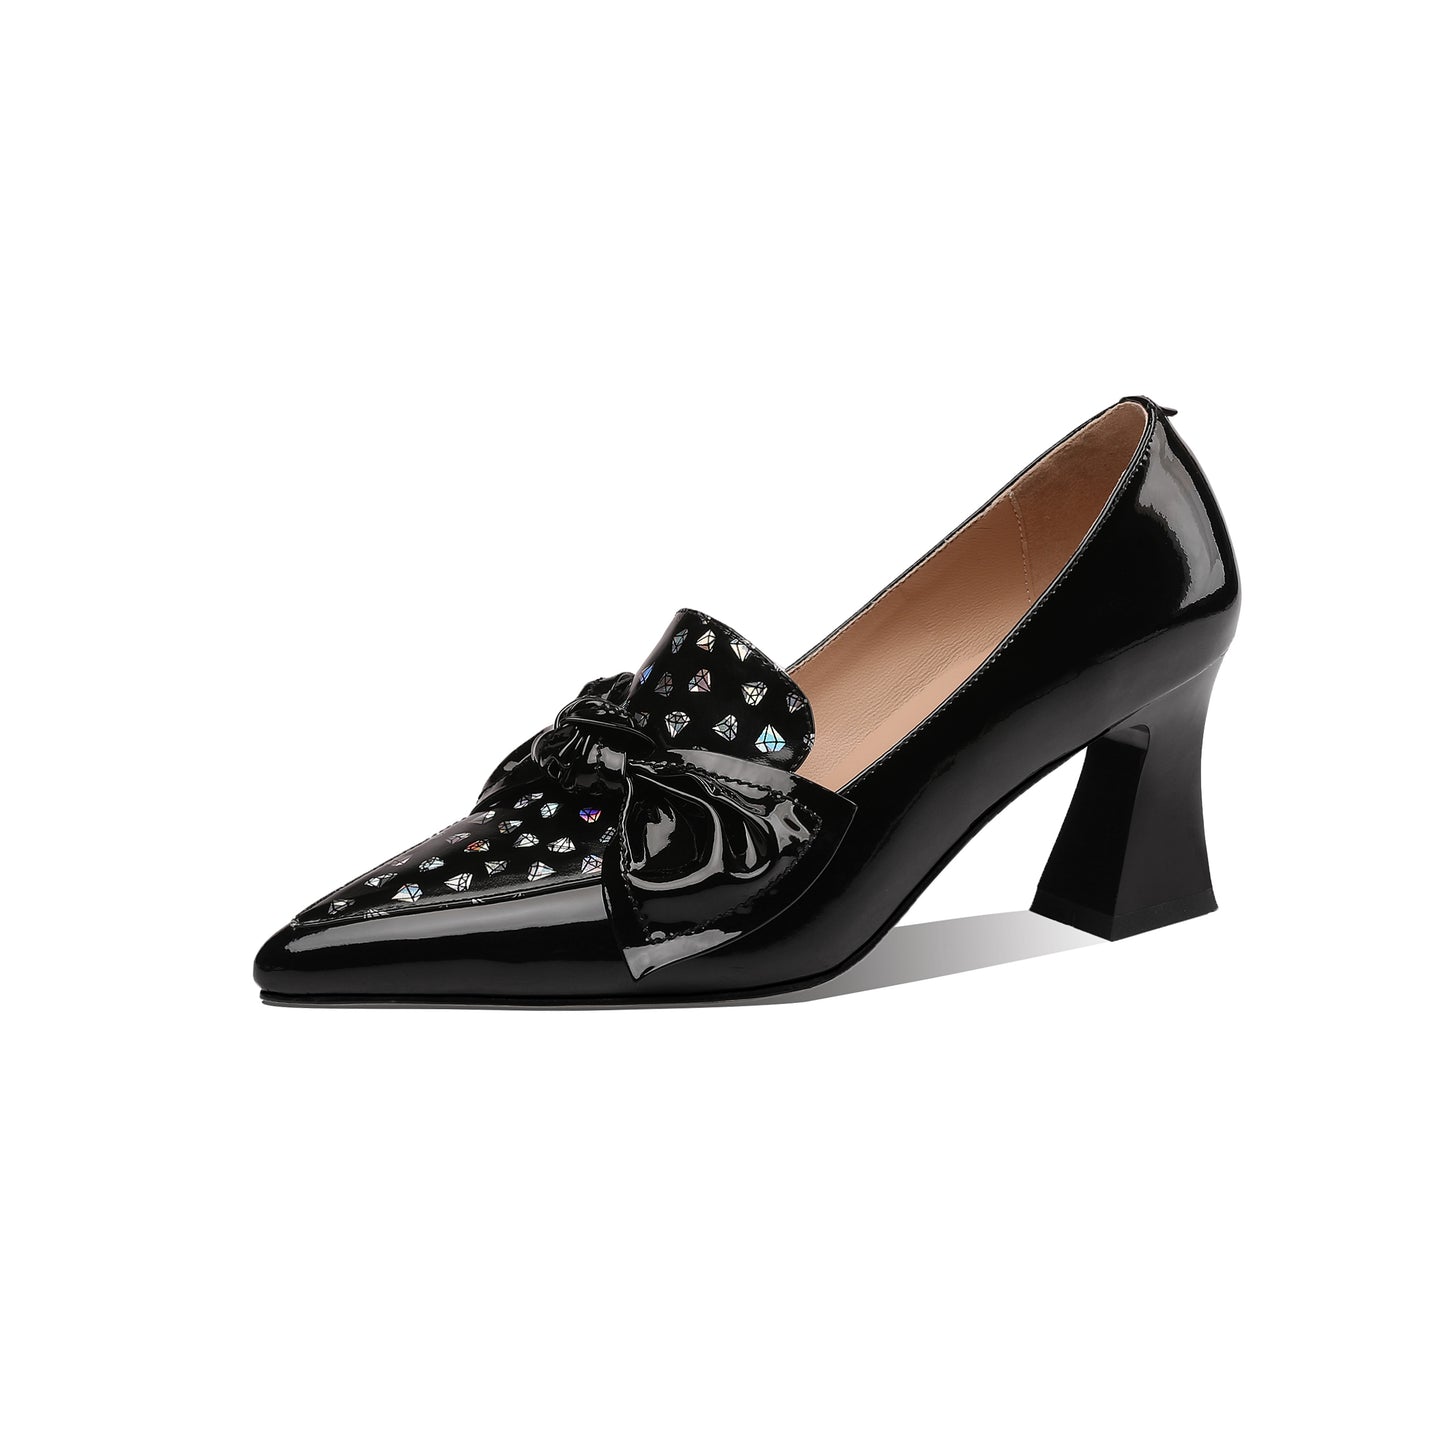 TinaCus Glossy Patent Leather Women's Handmade Pointed Toe Dots Decor Spool Heel Pumps with Bowknot